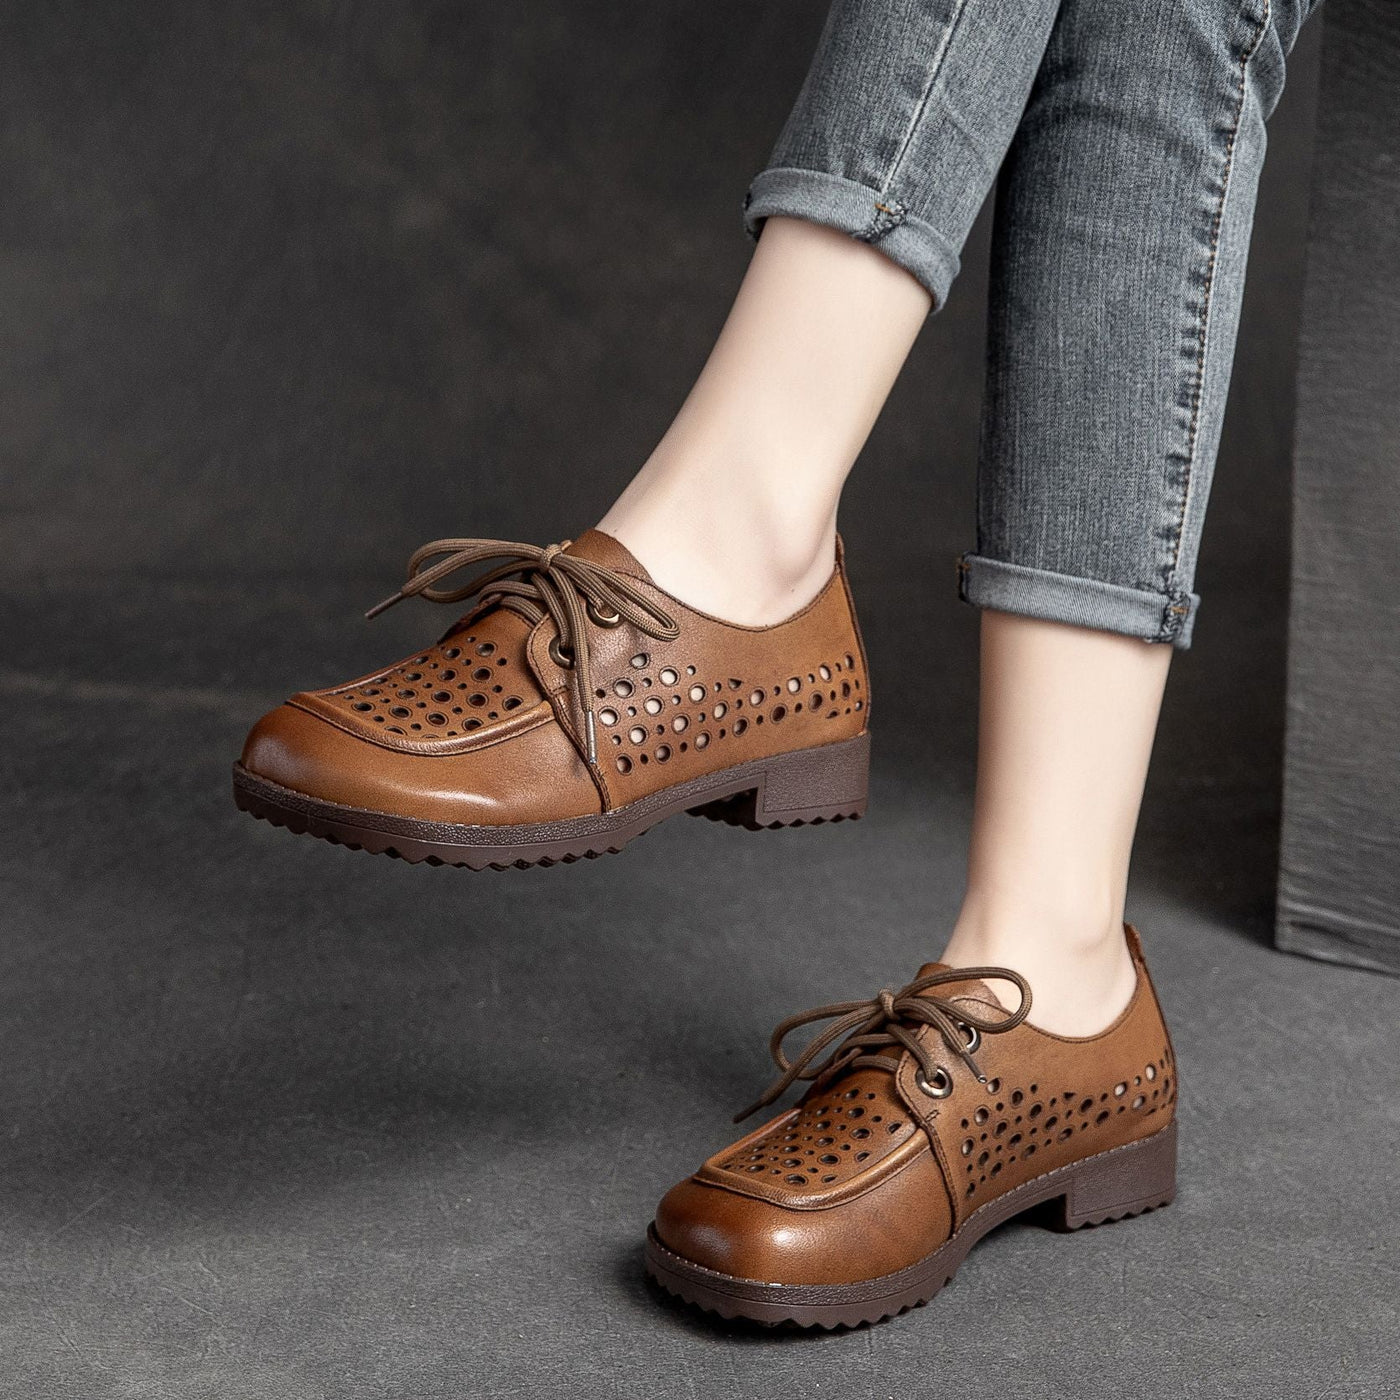 Summer Women Vintage Hollow Leather Casual Shoes Mar 2022 New Arrival 